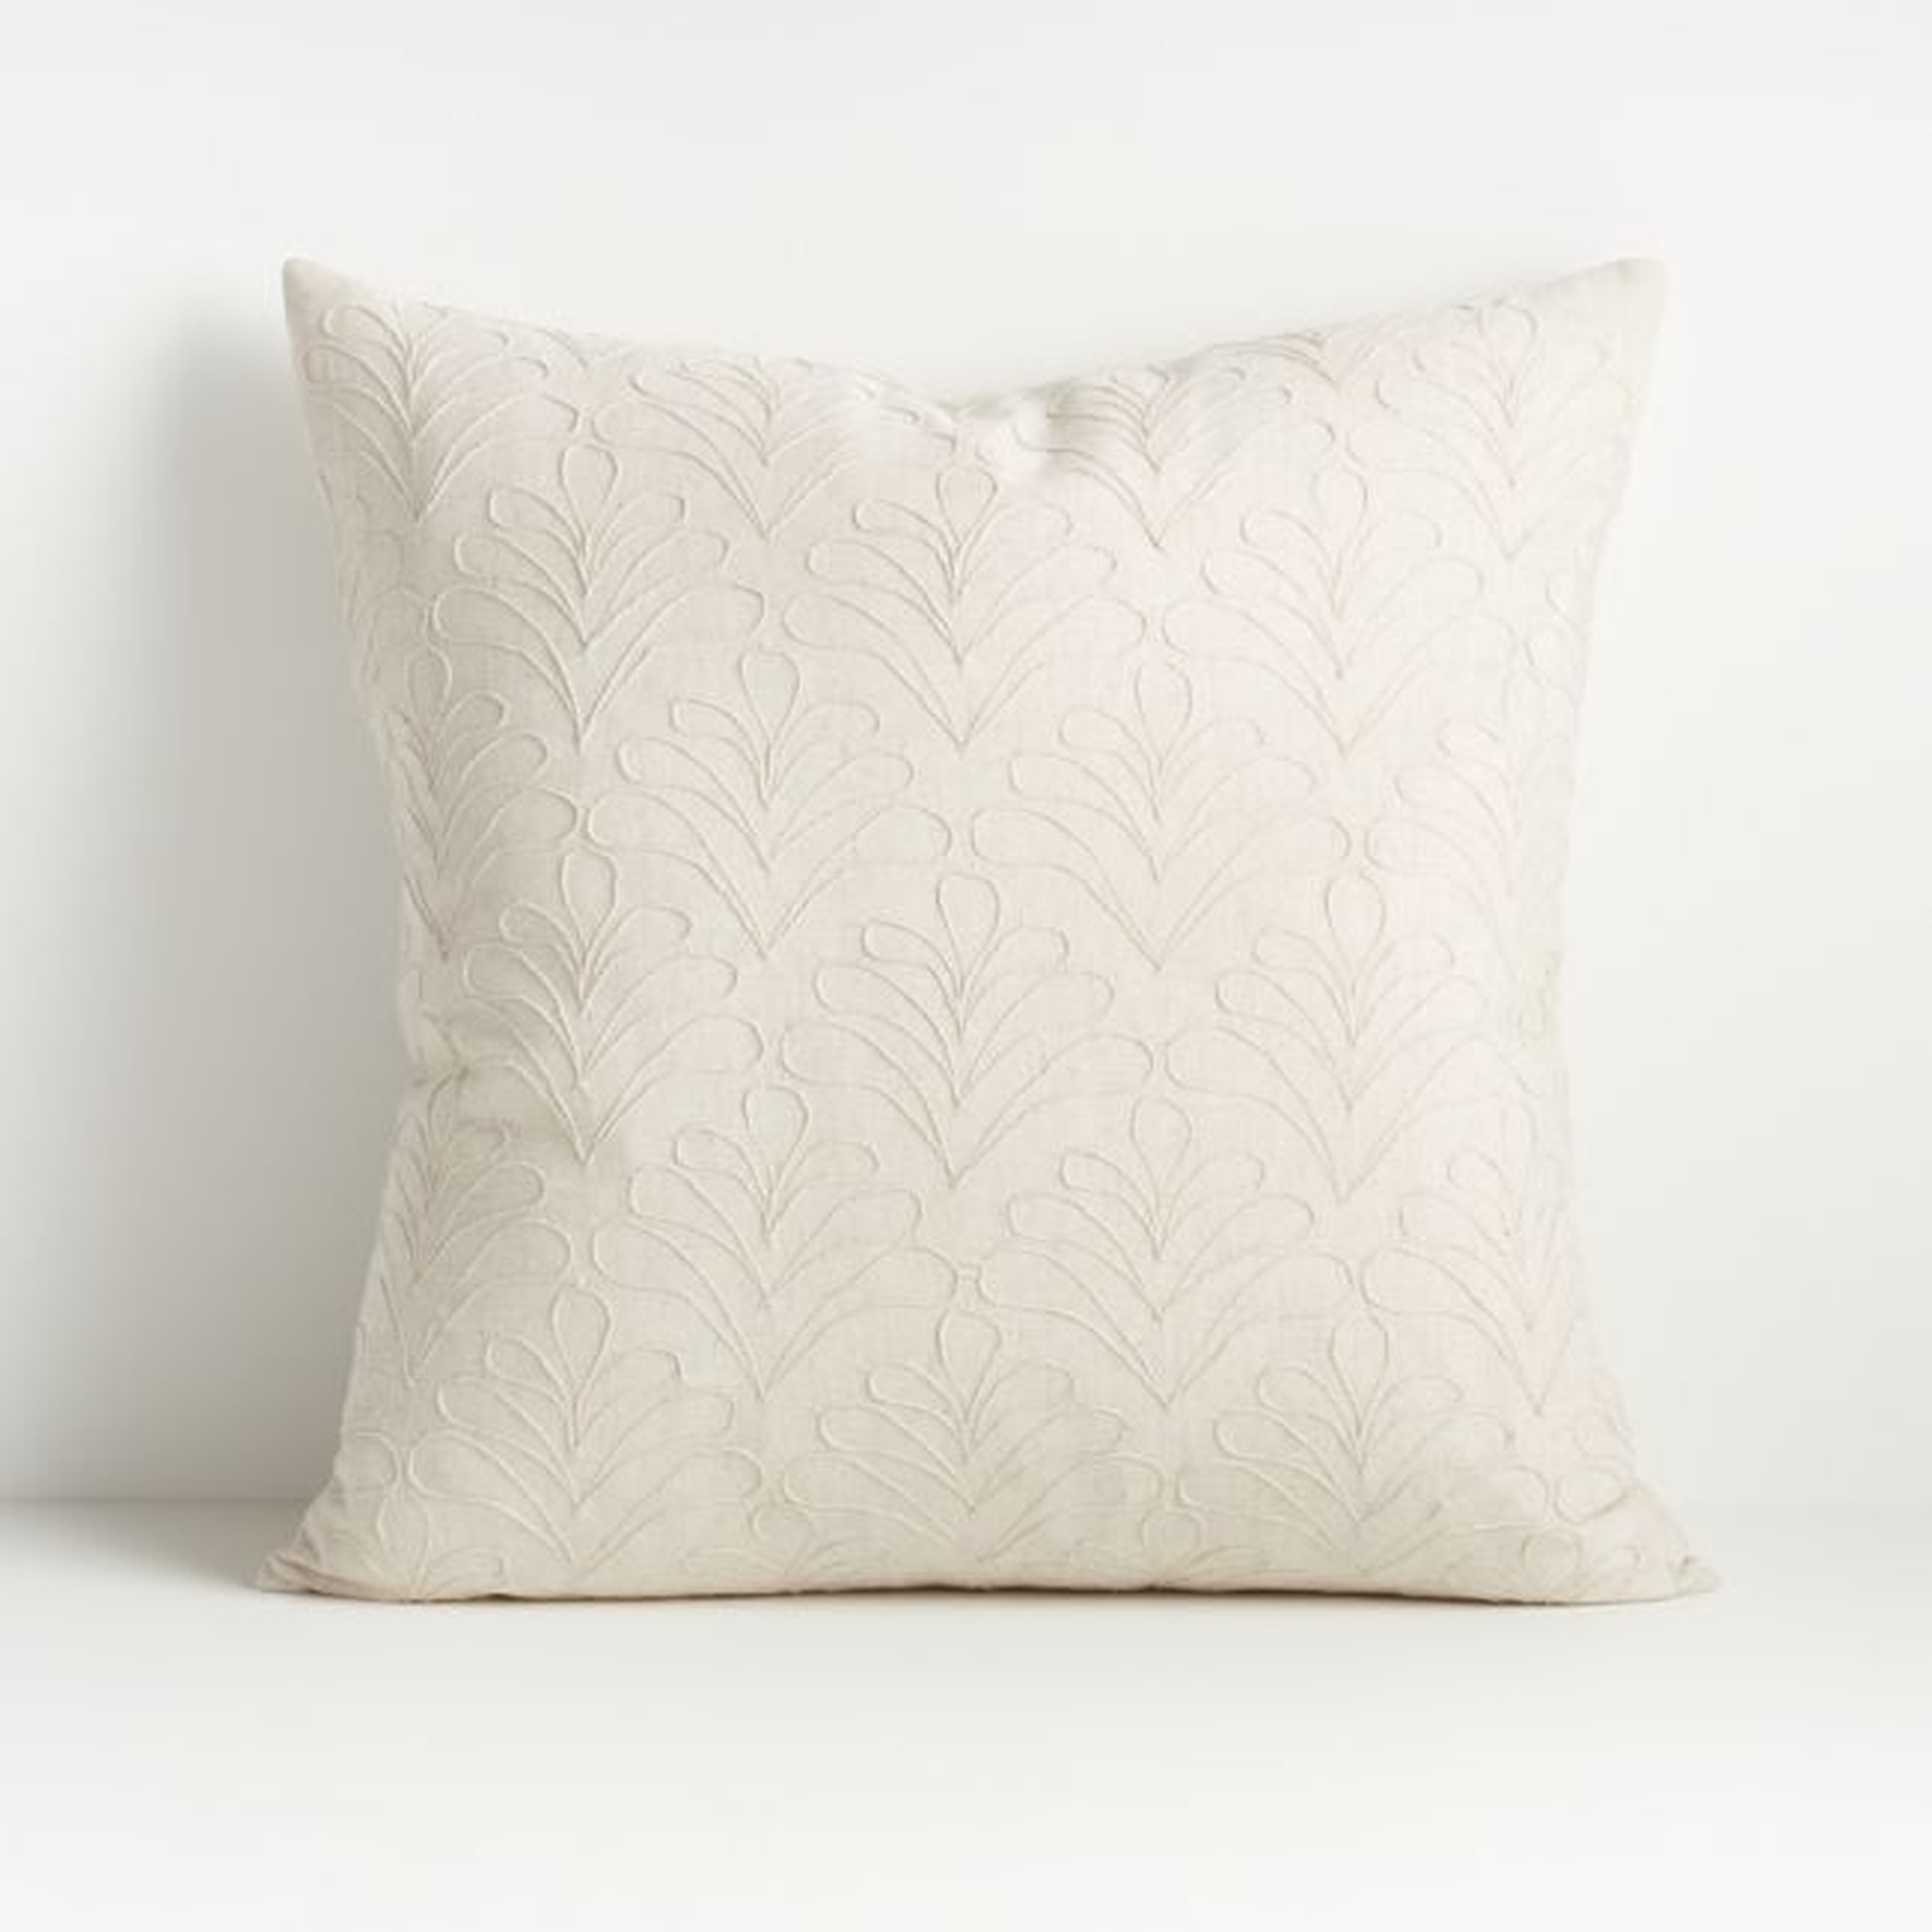 Mari White Textured Pillow 20" w/feather down insert - Crate and Barrel